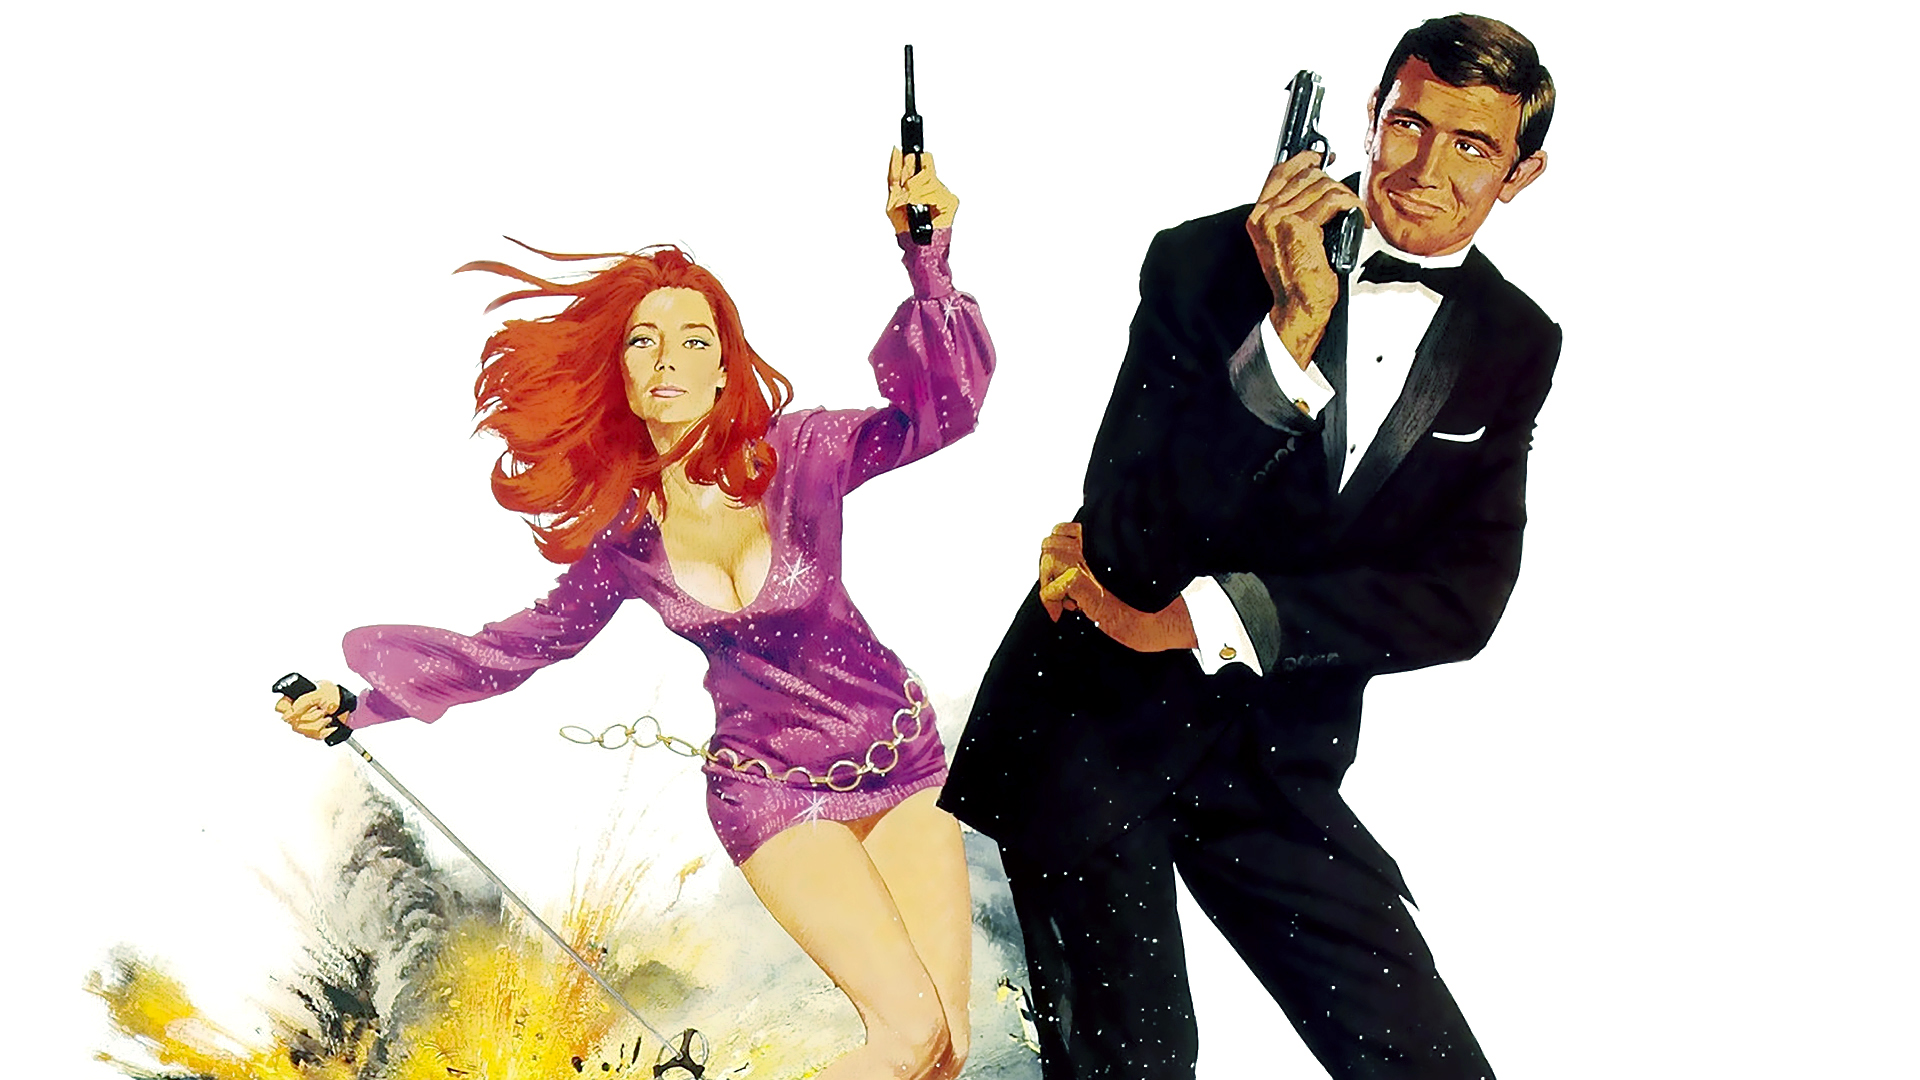 Amazing On Her Majesty's Secret Service Pictures & Backgrounds